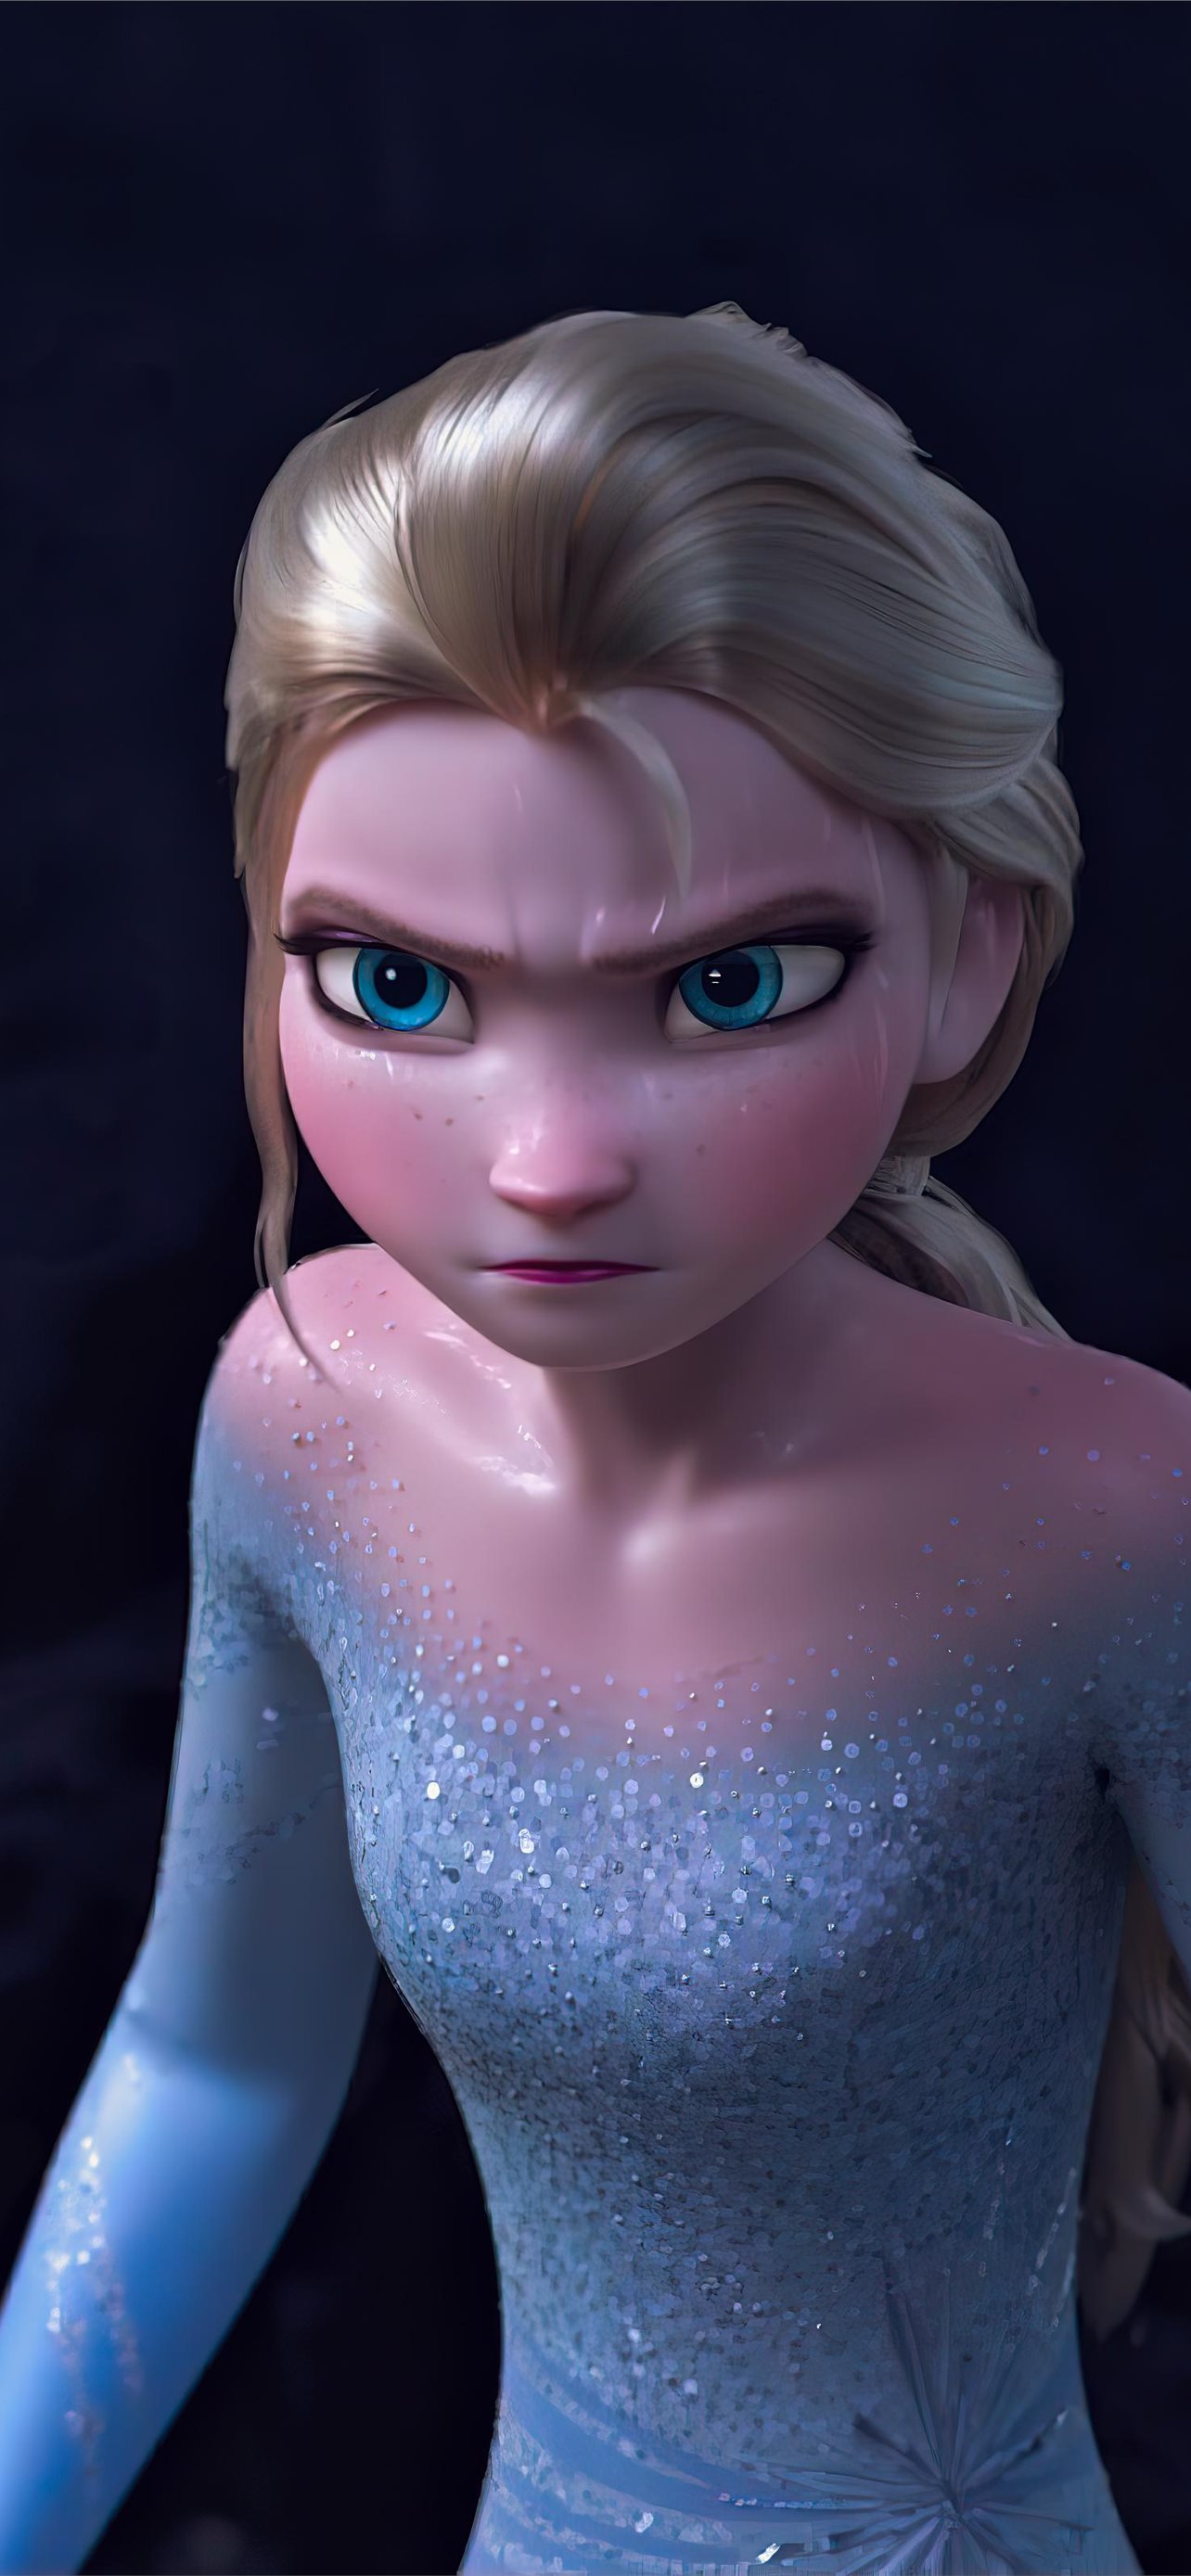 Pictures Of Elsa From Frozen 2 Wallpapers